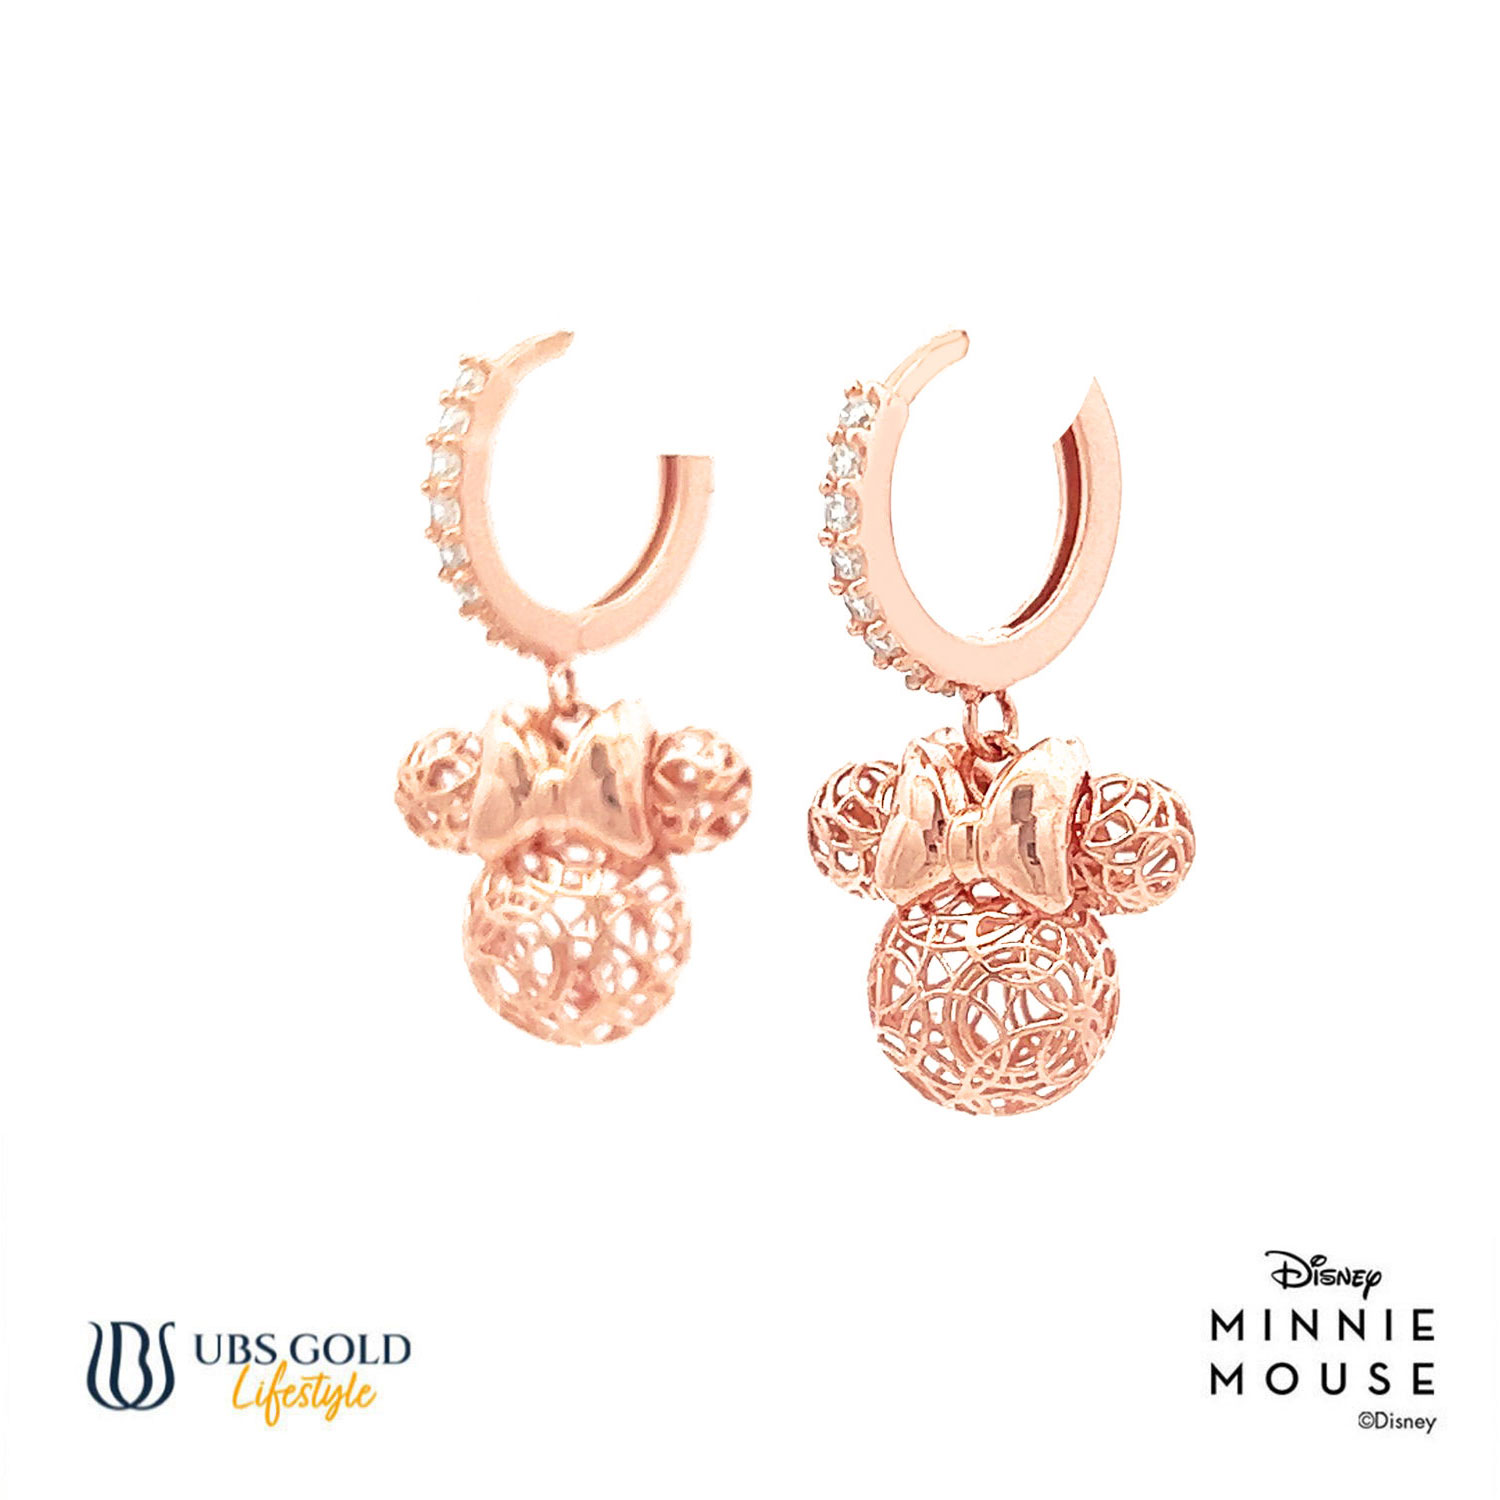 UBS Gold Anting Emas Disney Minnie Mouse - Cay0024 - 17K